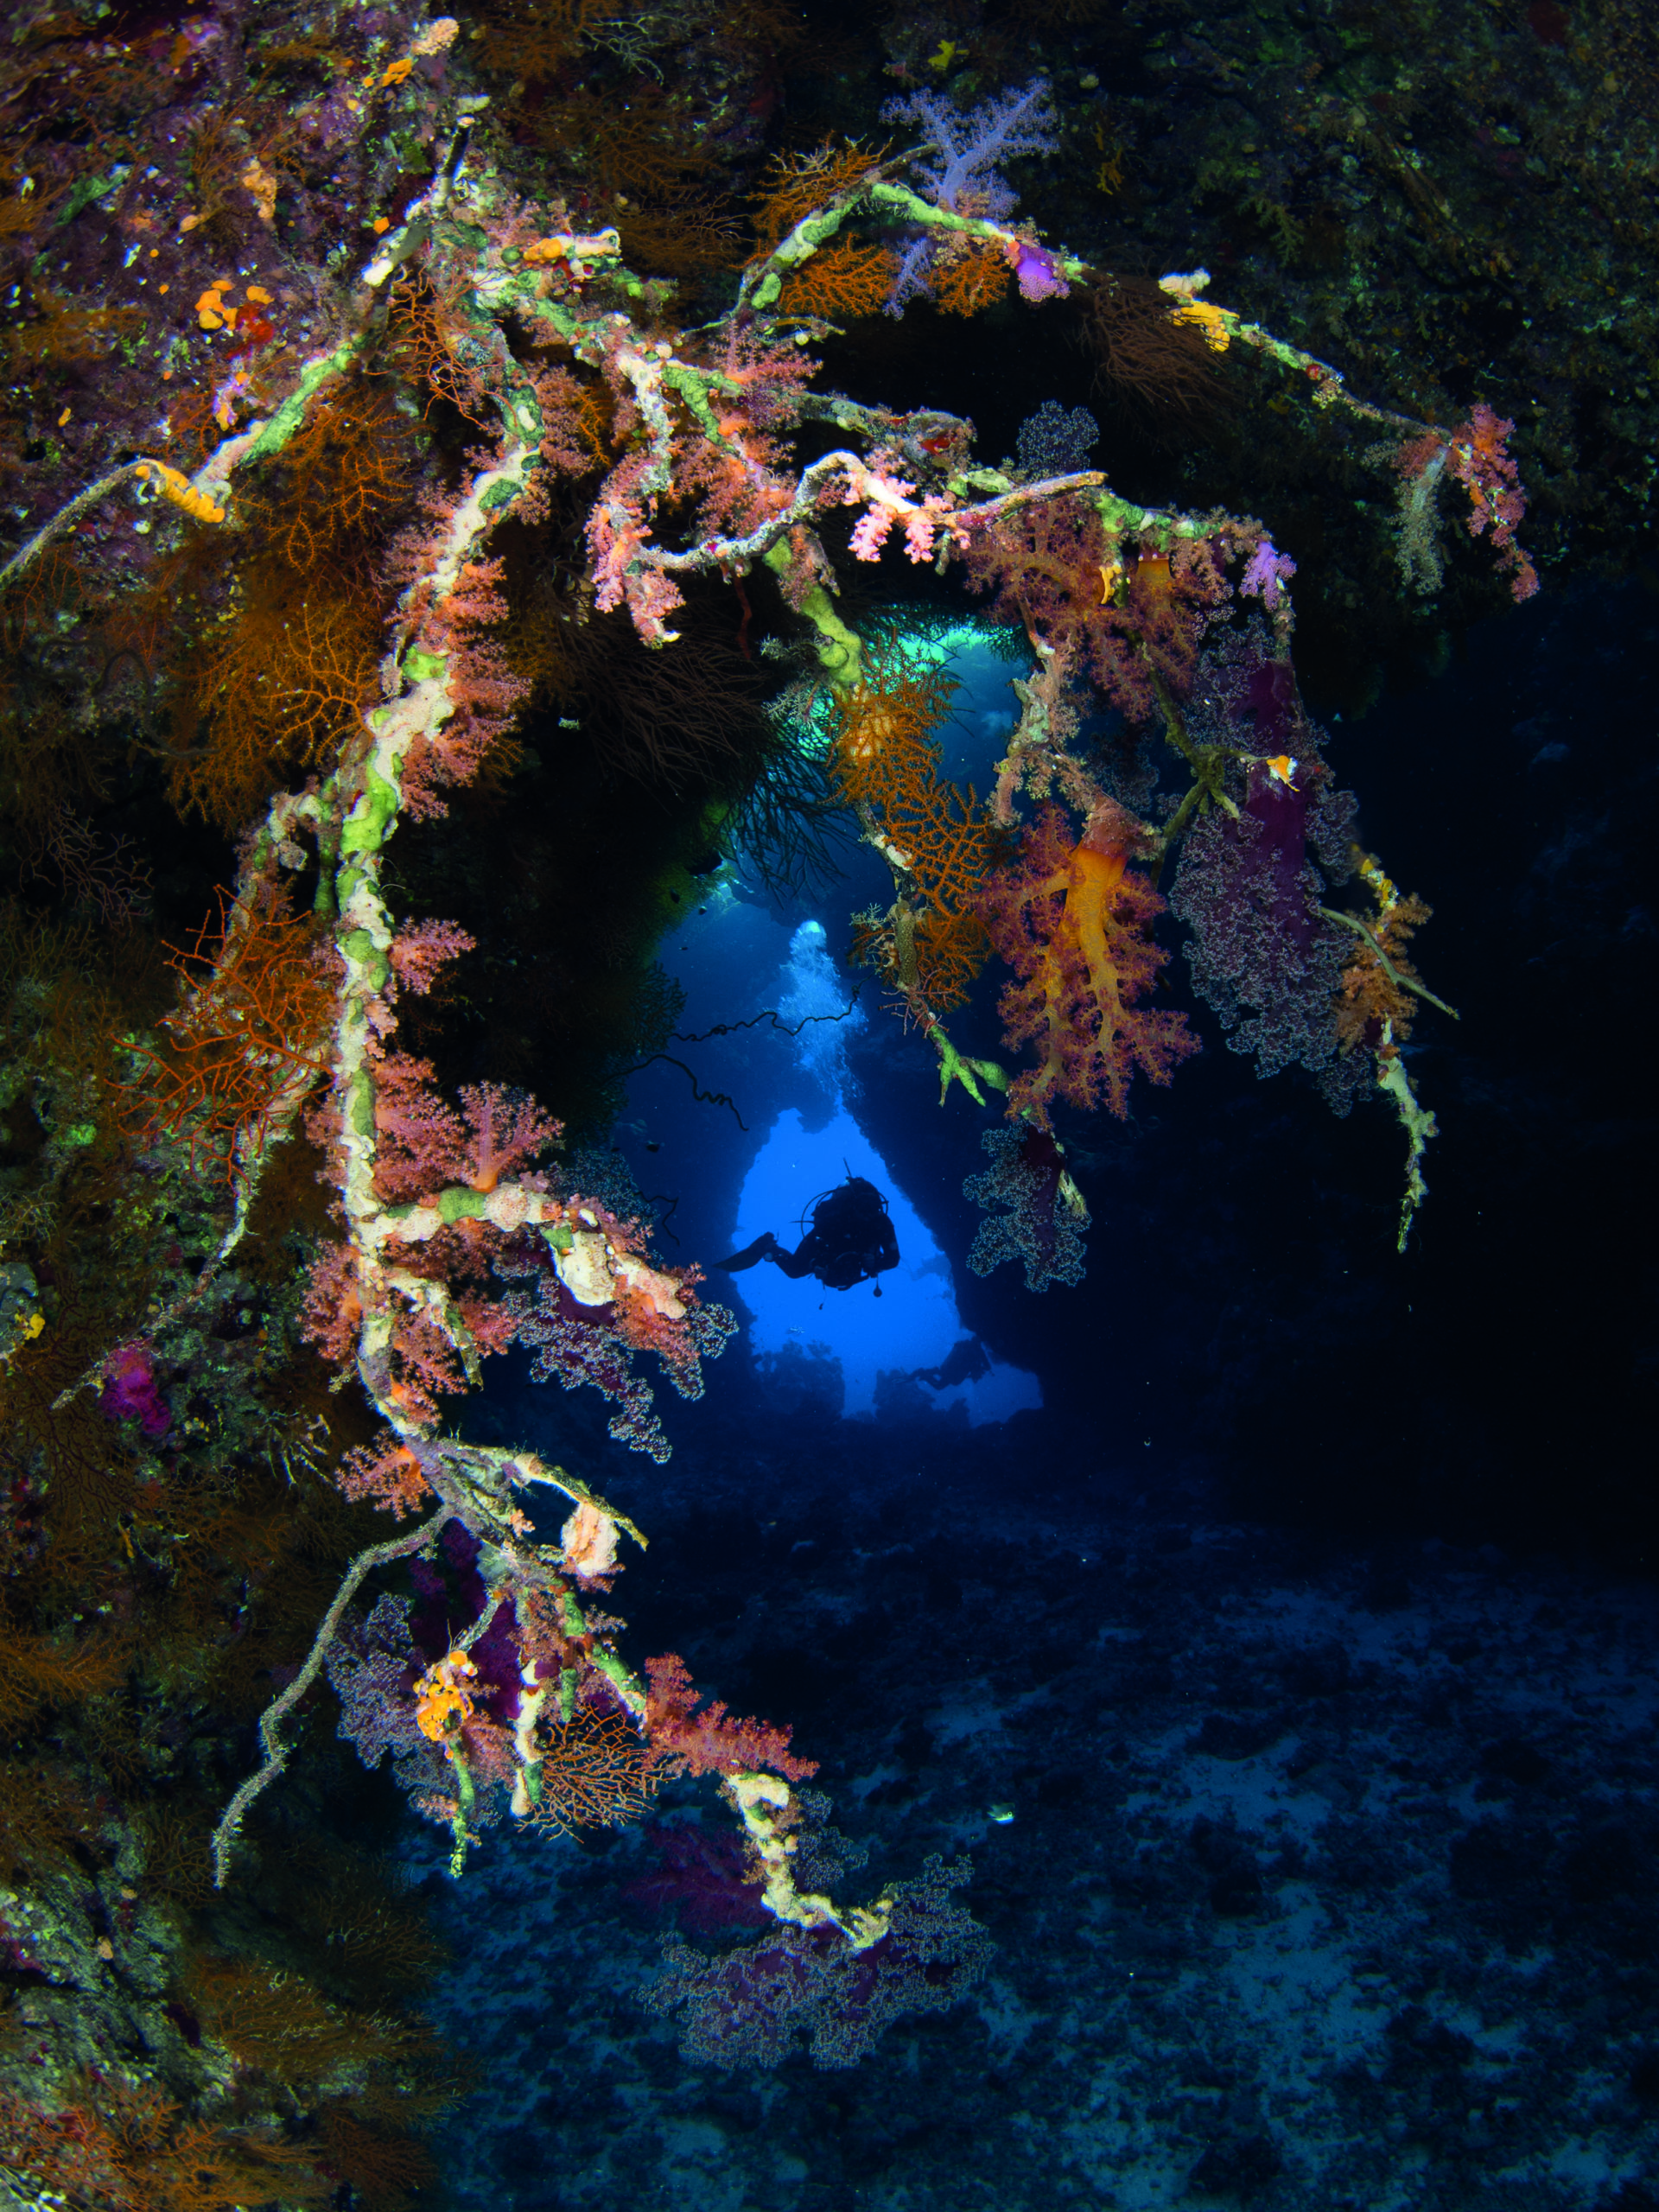 This shot is based on a famous picture from Martin Edge. A soft coral encrusted seafan structure in the foreground is the image focal point, it helps framing a diver silhouetted against the cavern entrance in the background.